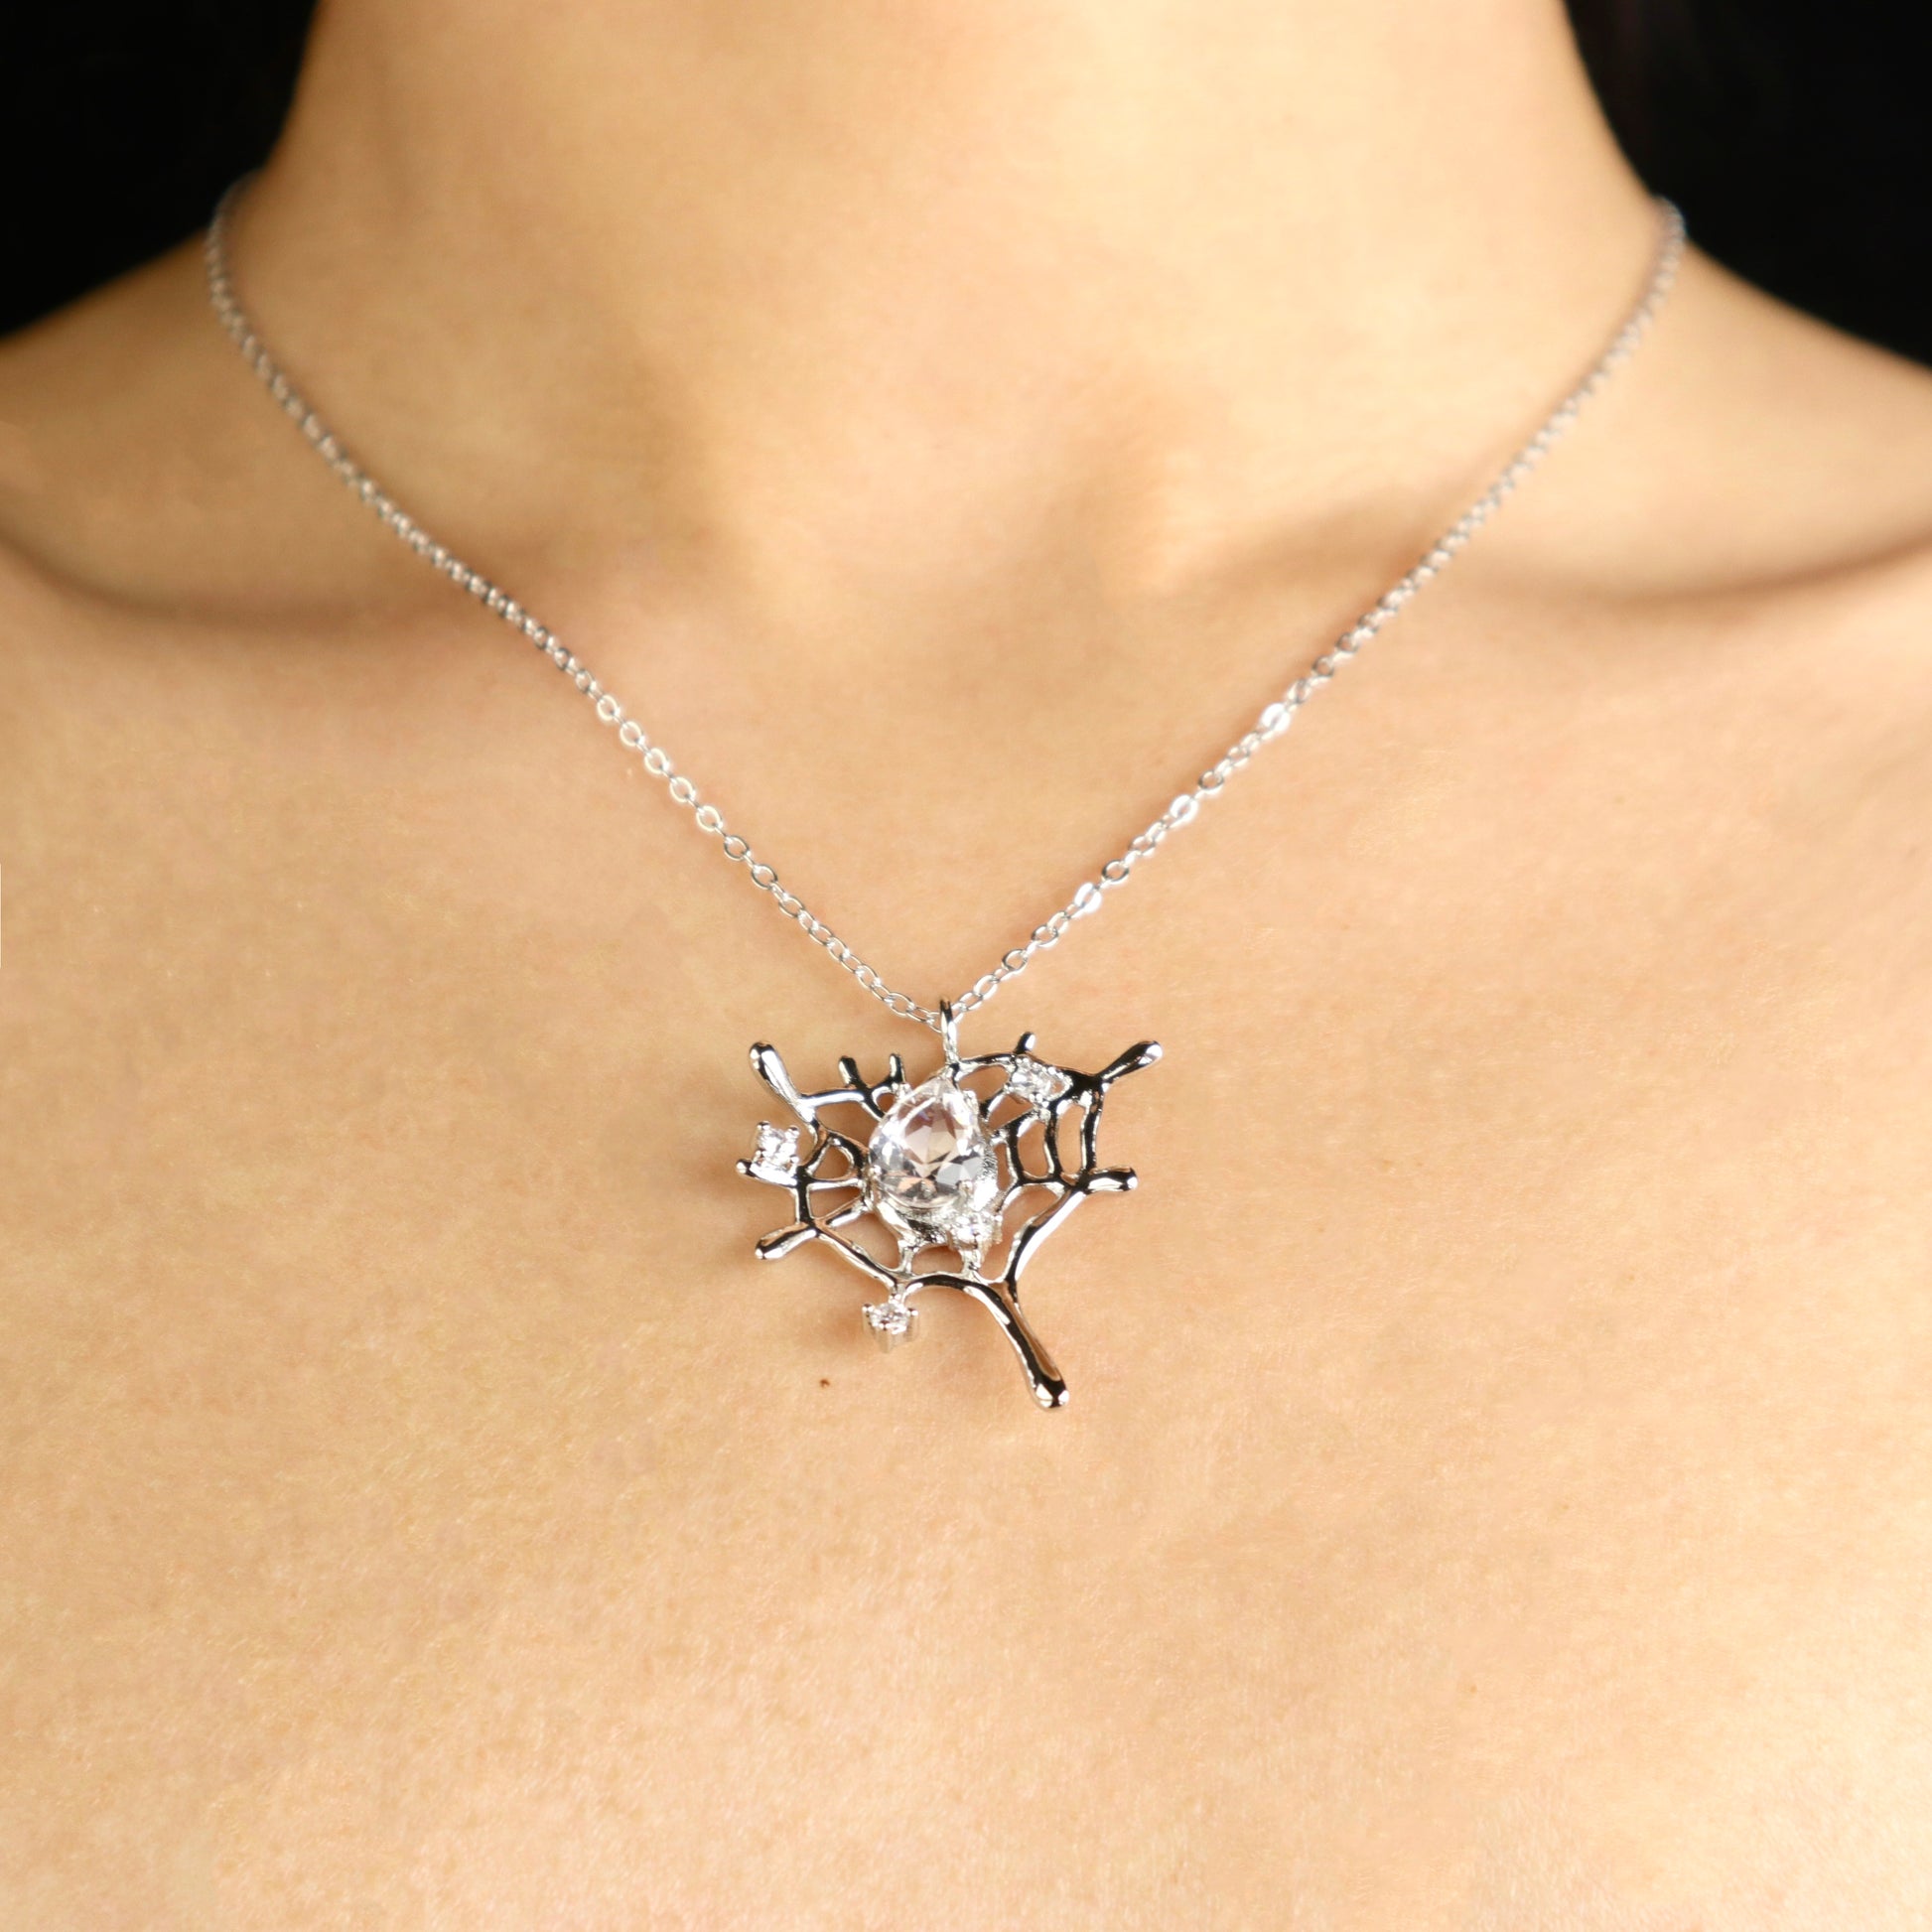 Silver Spider Web necklace for halloween gift